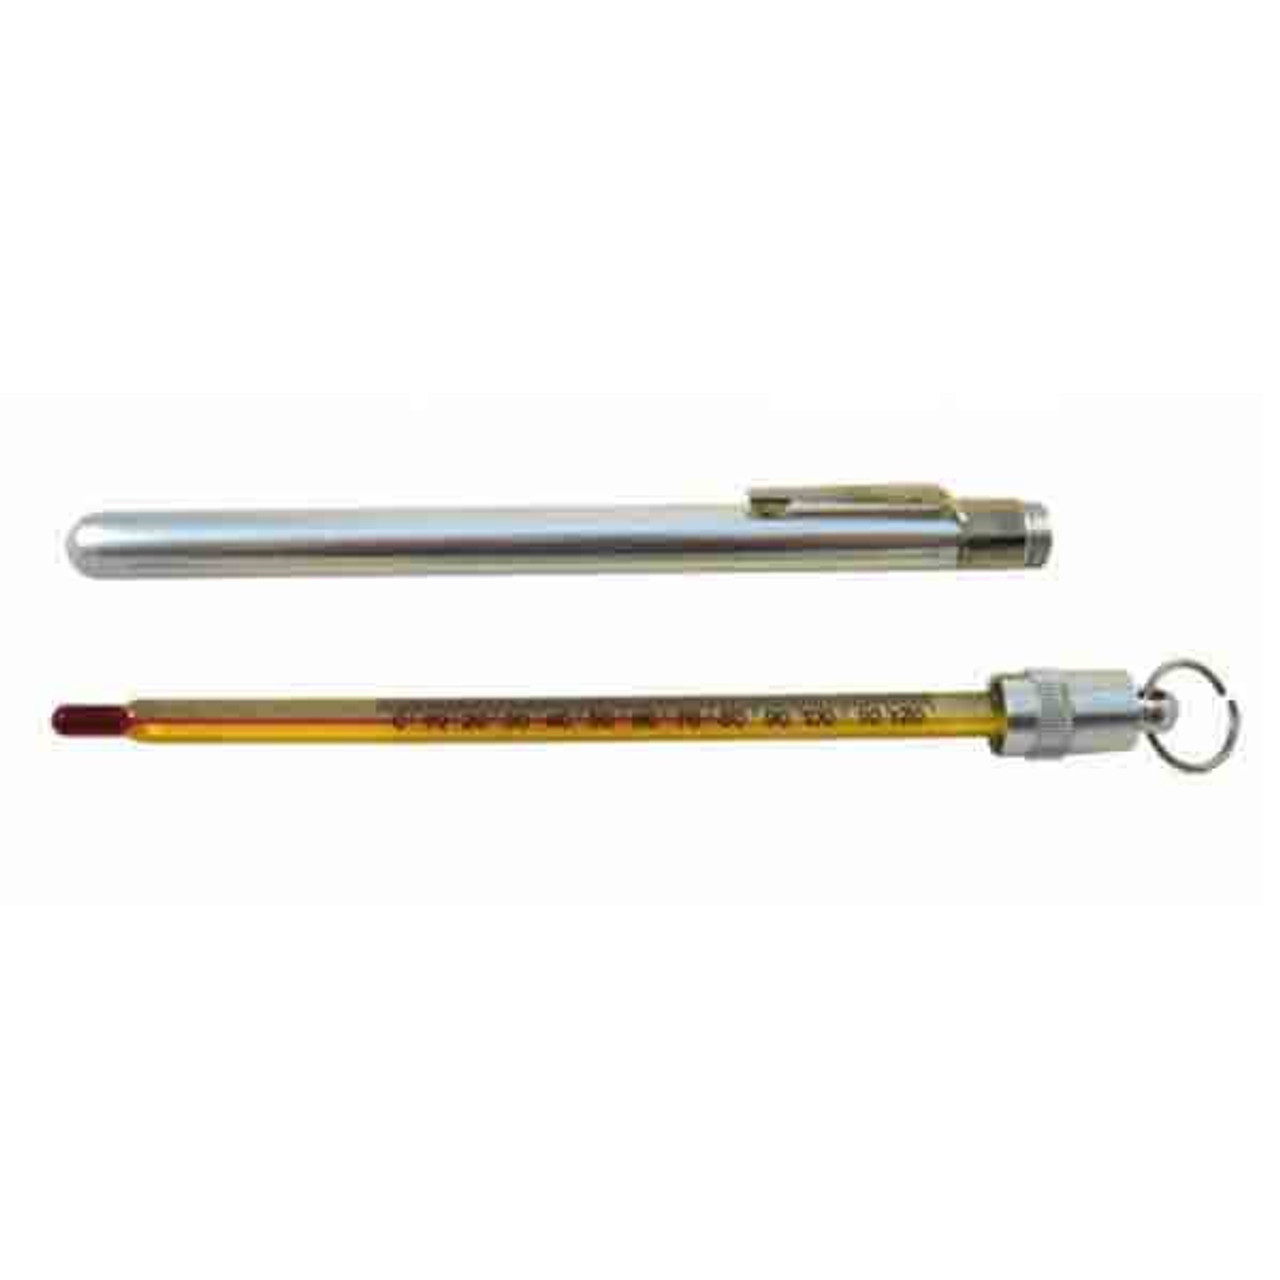 18 Metal Thermometer Taylor